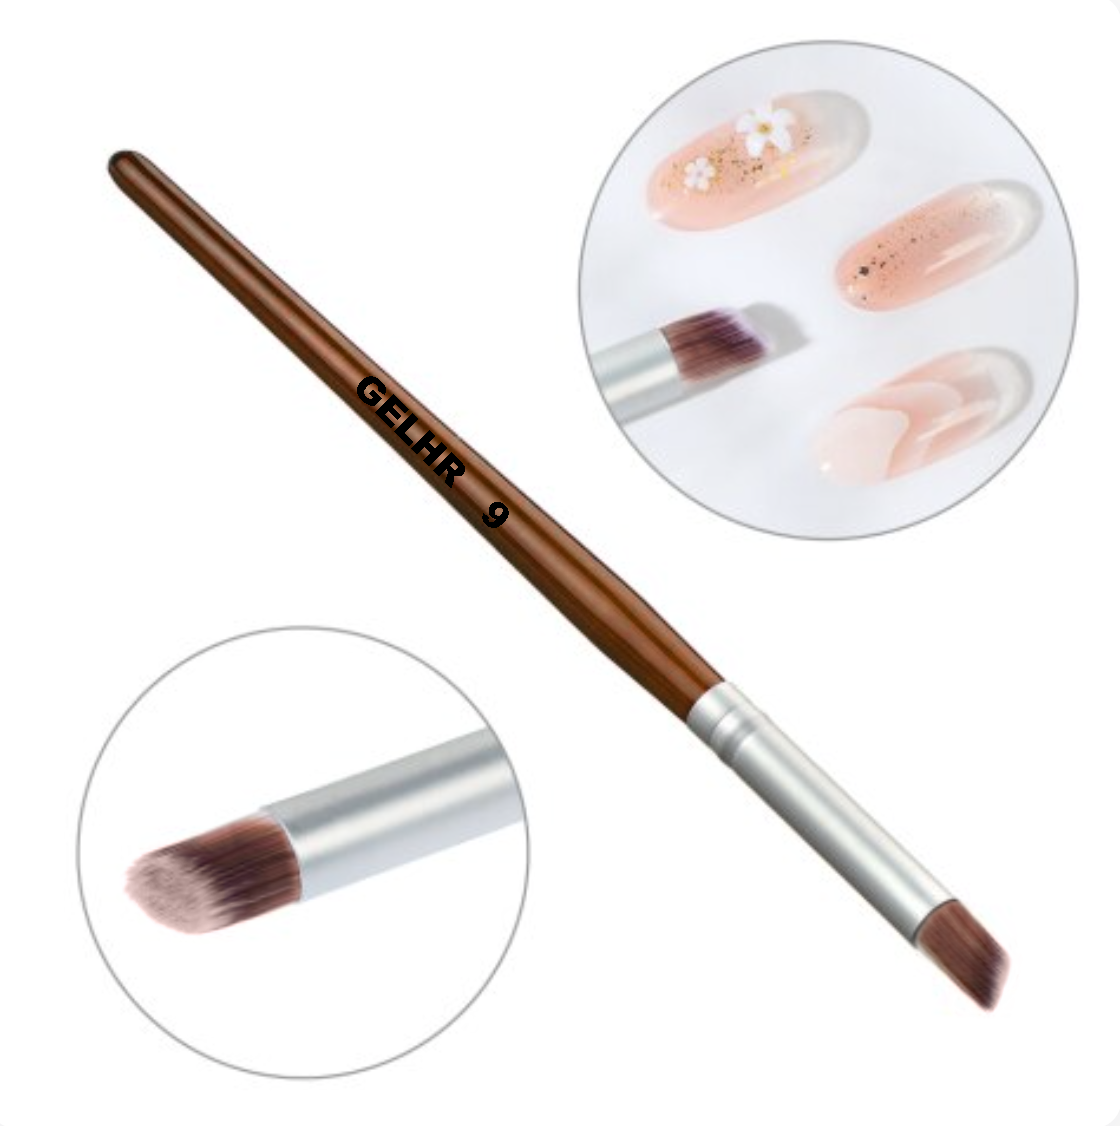 Nail Art Brush - Ombre Powder, Gel, One Stroke Painting Brush (Lid included) (SET OF 3pcs)